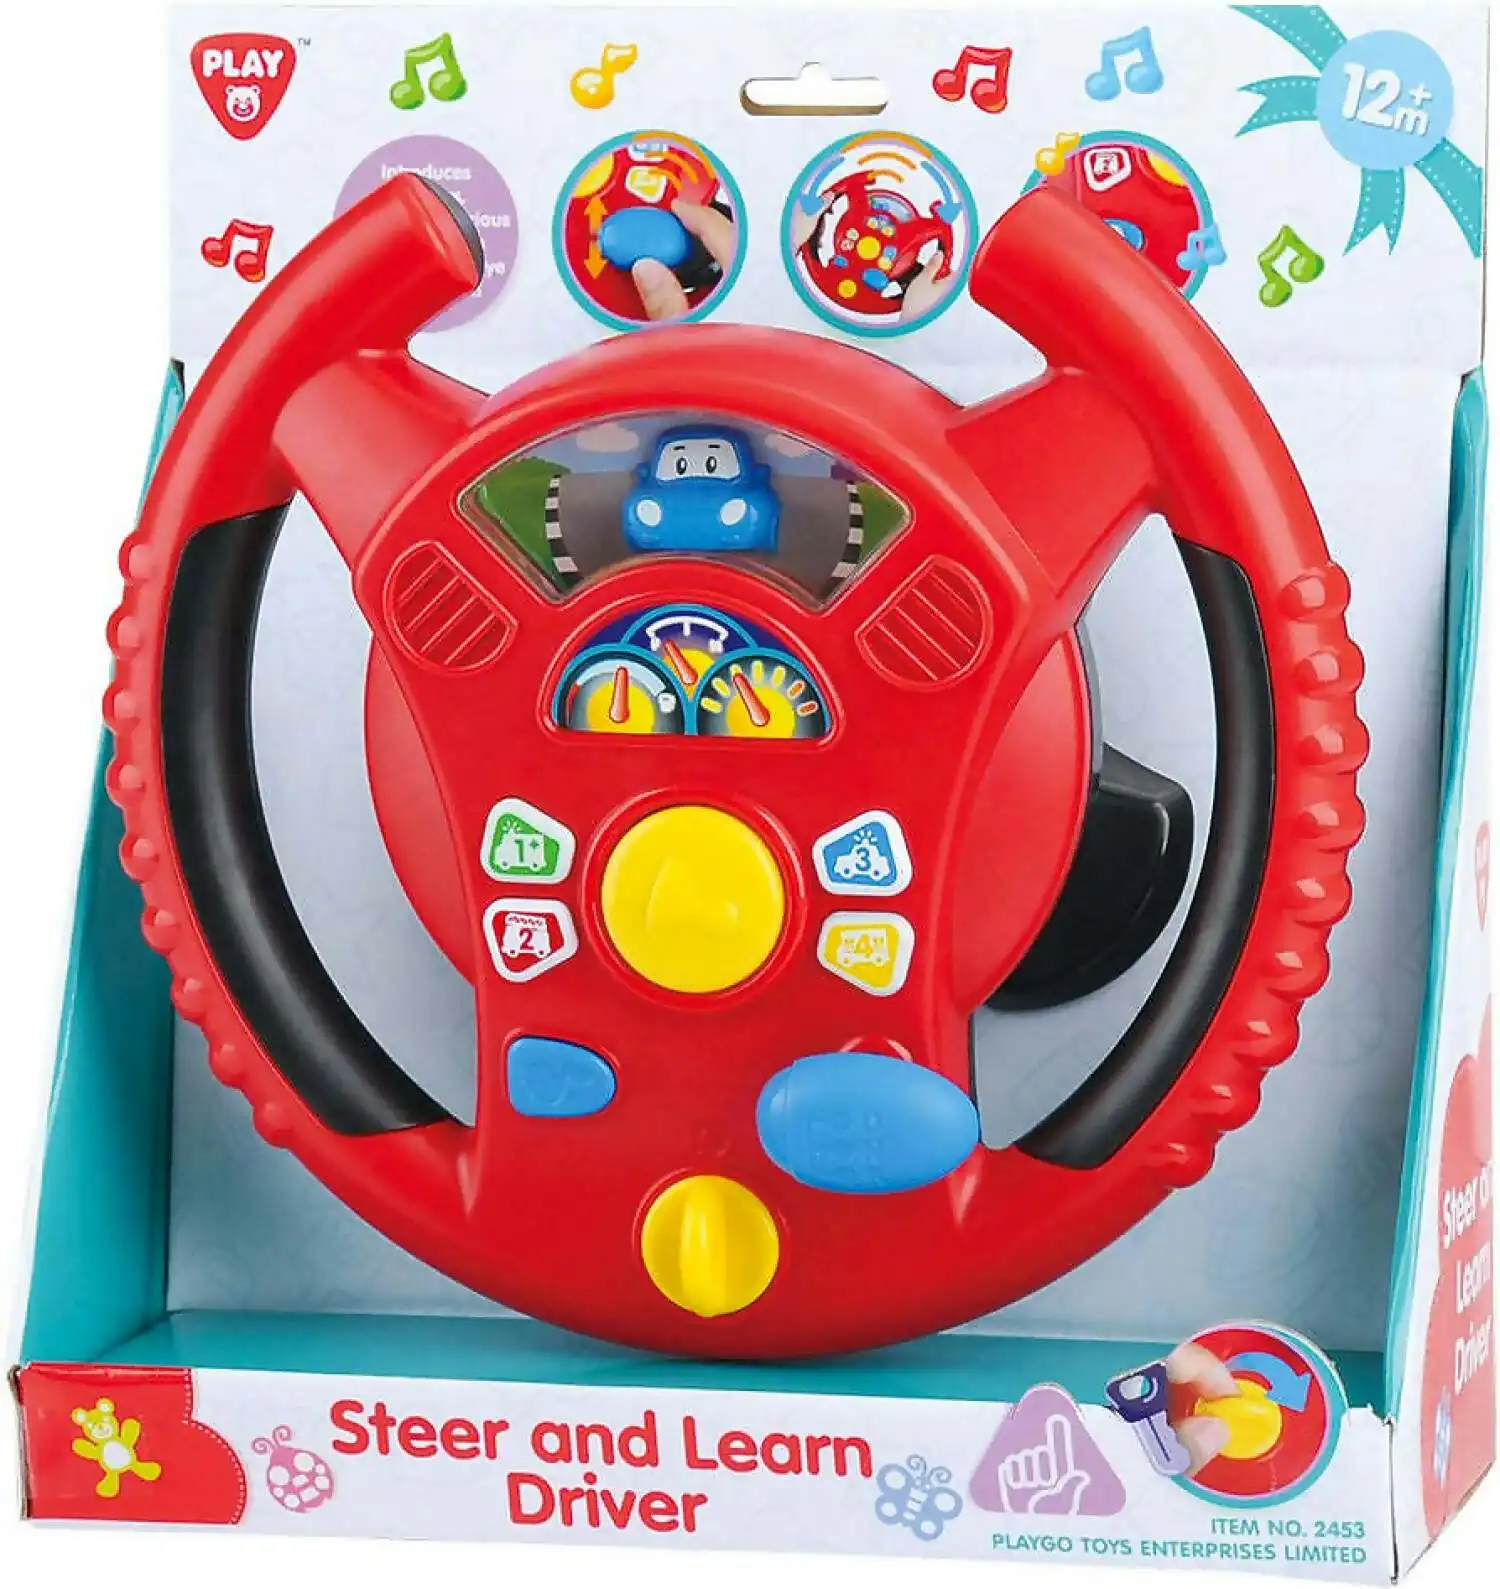 Playgo Toys Ent. Ltd. - Battery Operated Steer & Learn Driver